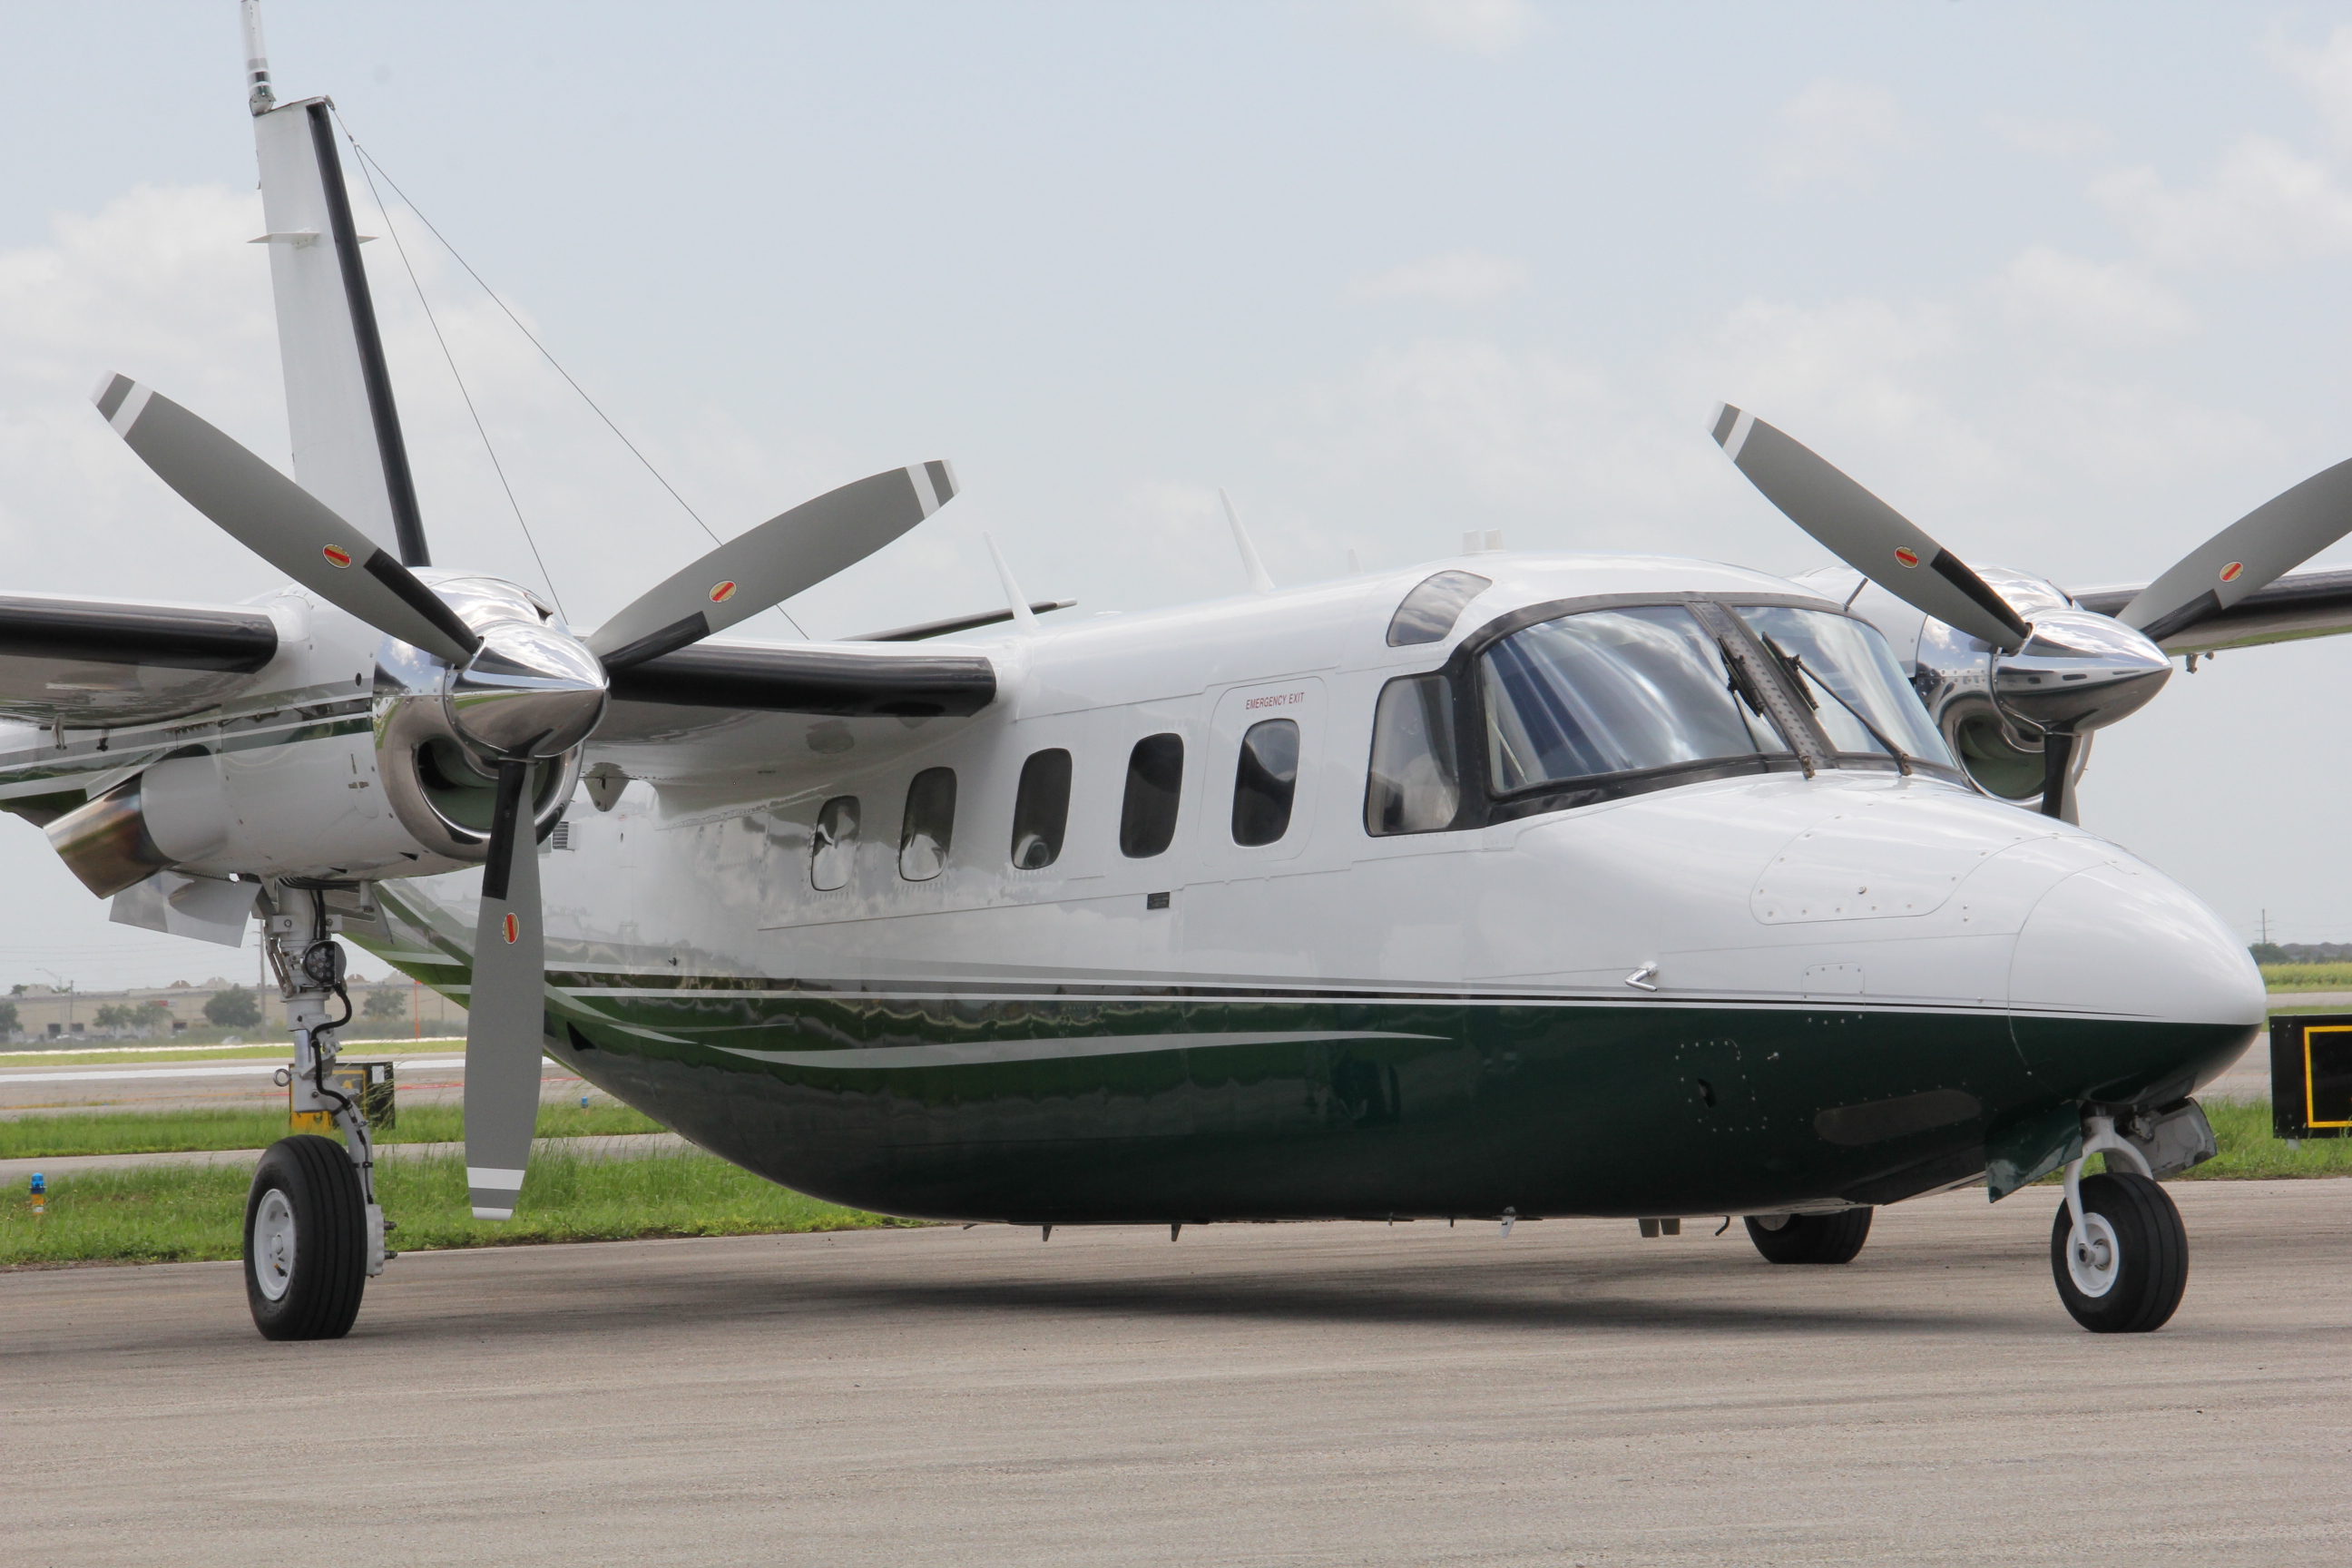 695 BOOT P/N 860227-9 NEW TWIN COMMANDER 690